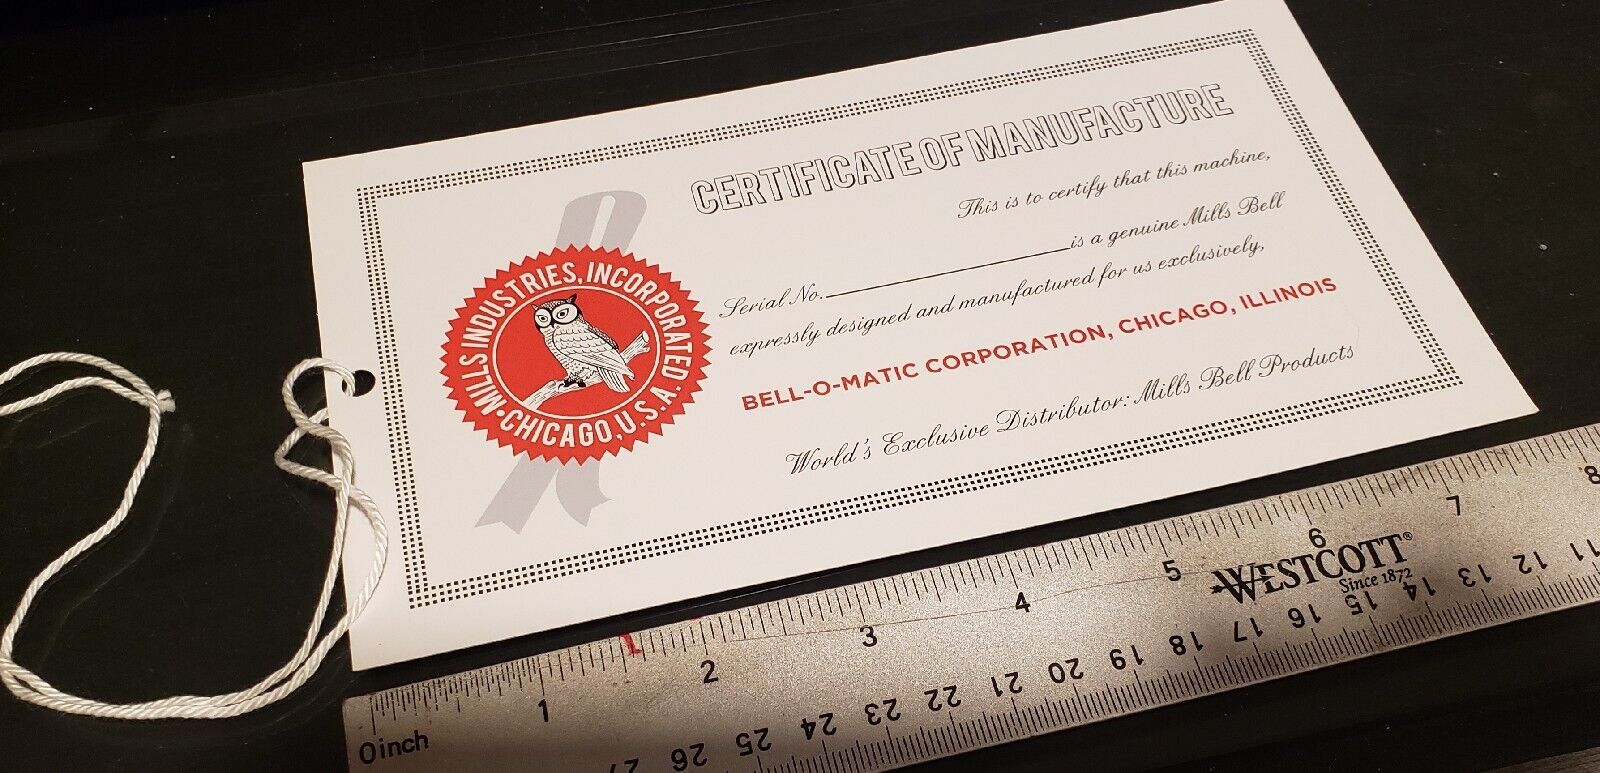 NOS MILLS ANTIQUE SLOT MACHINE CERTIFICATE OF MANUFACTURE BELL-O-MATIC TAG